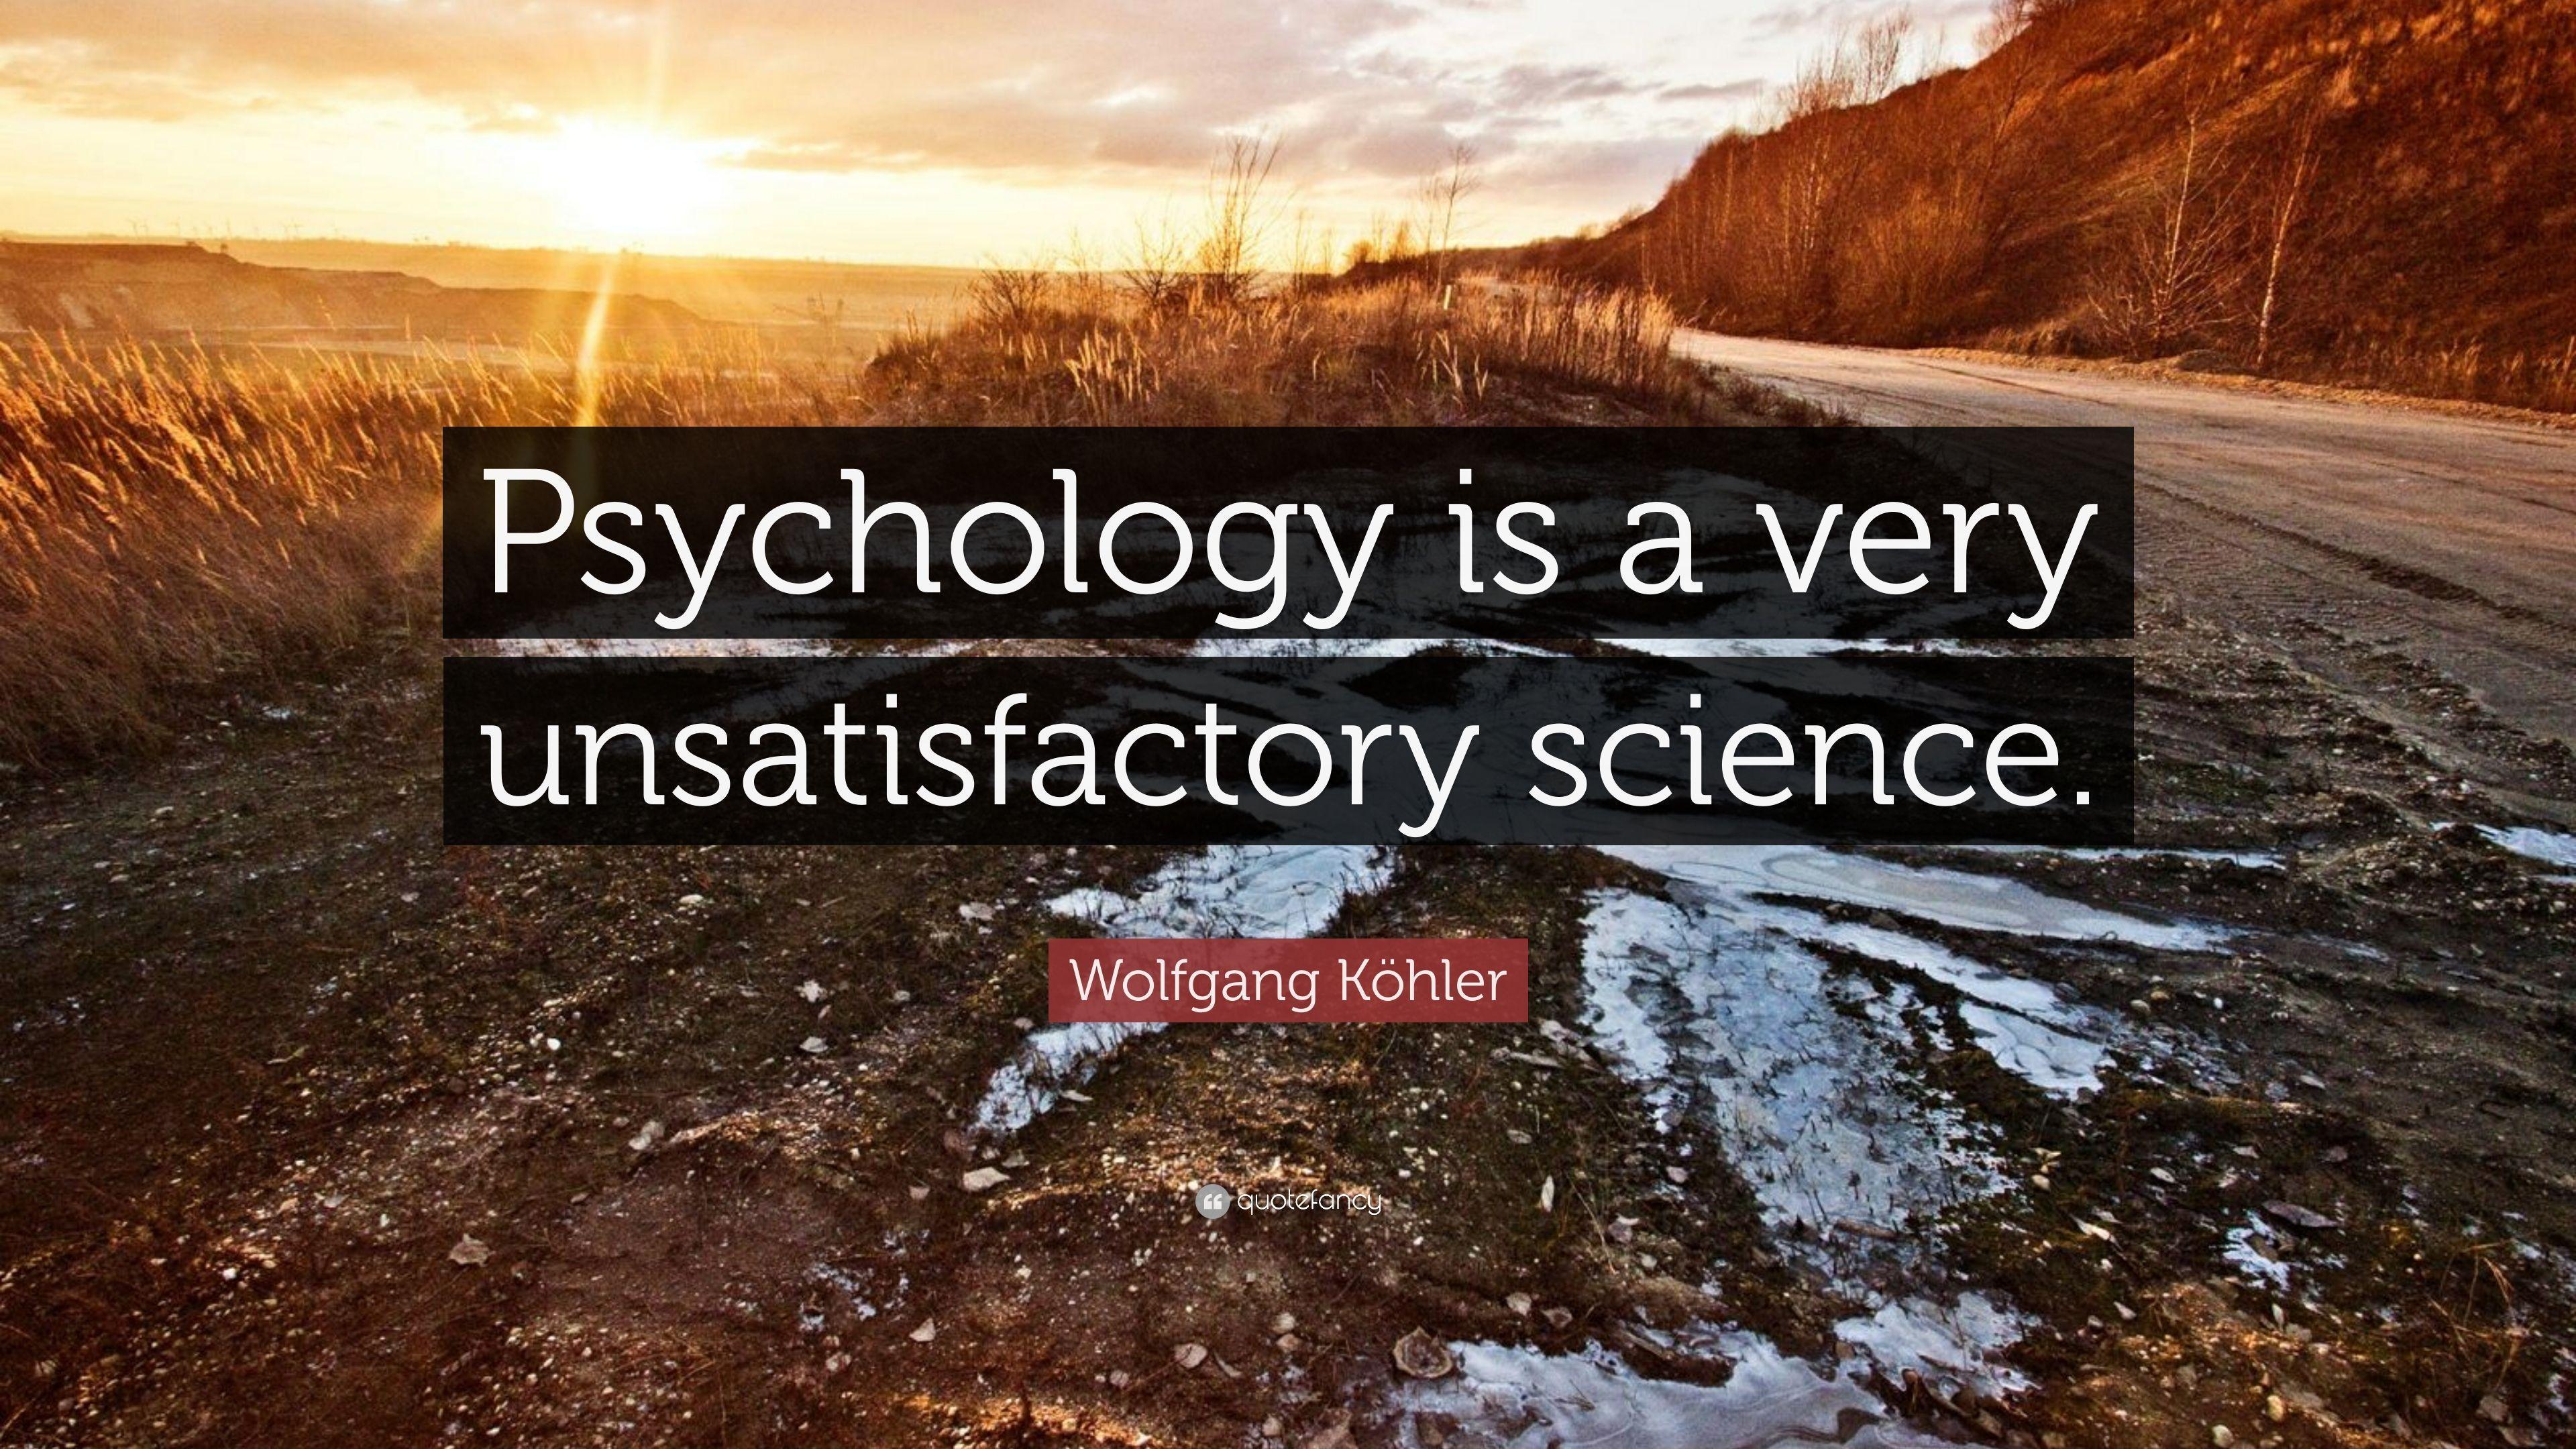 Wolfgang Köhler Quote: “Psychology is a very unsatisfactory